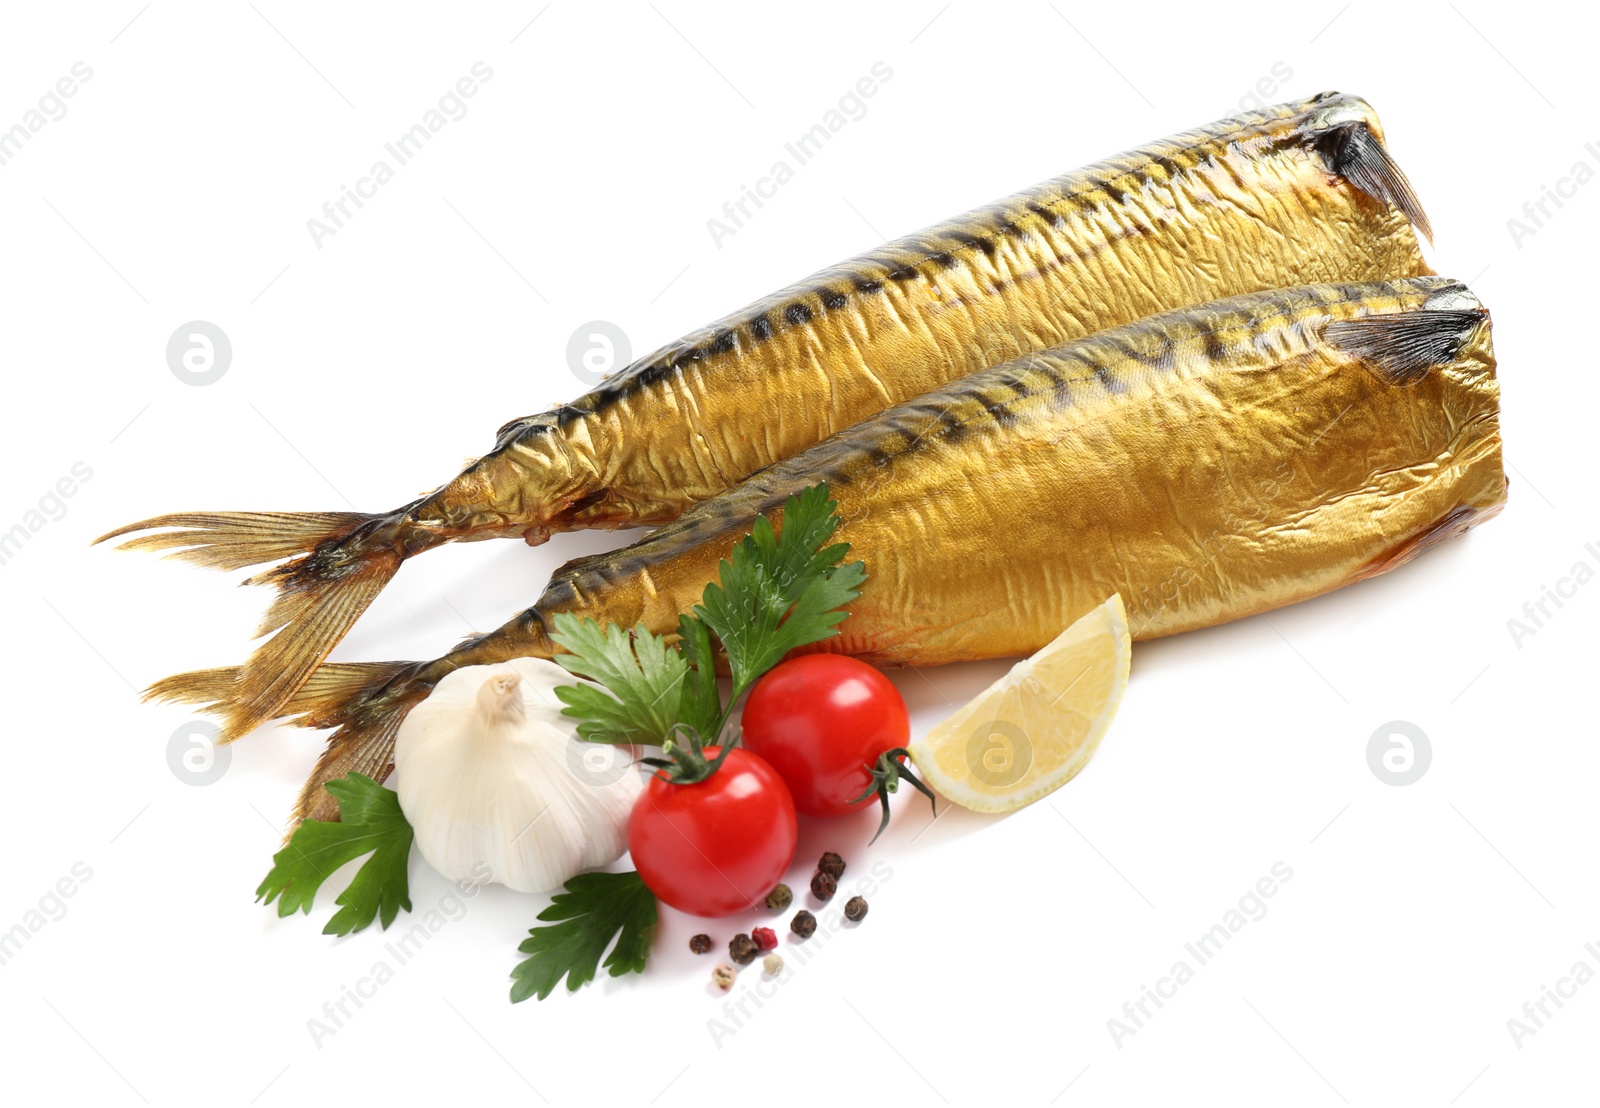 Photo of Tasty smoked fish with vegetables and lemon on white background